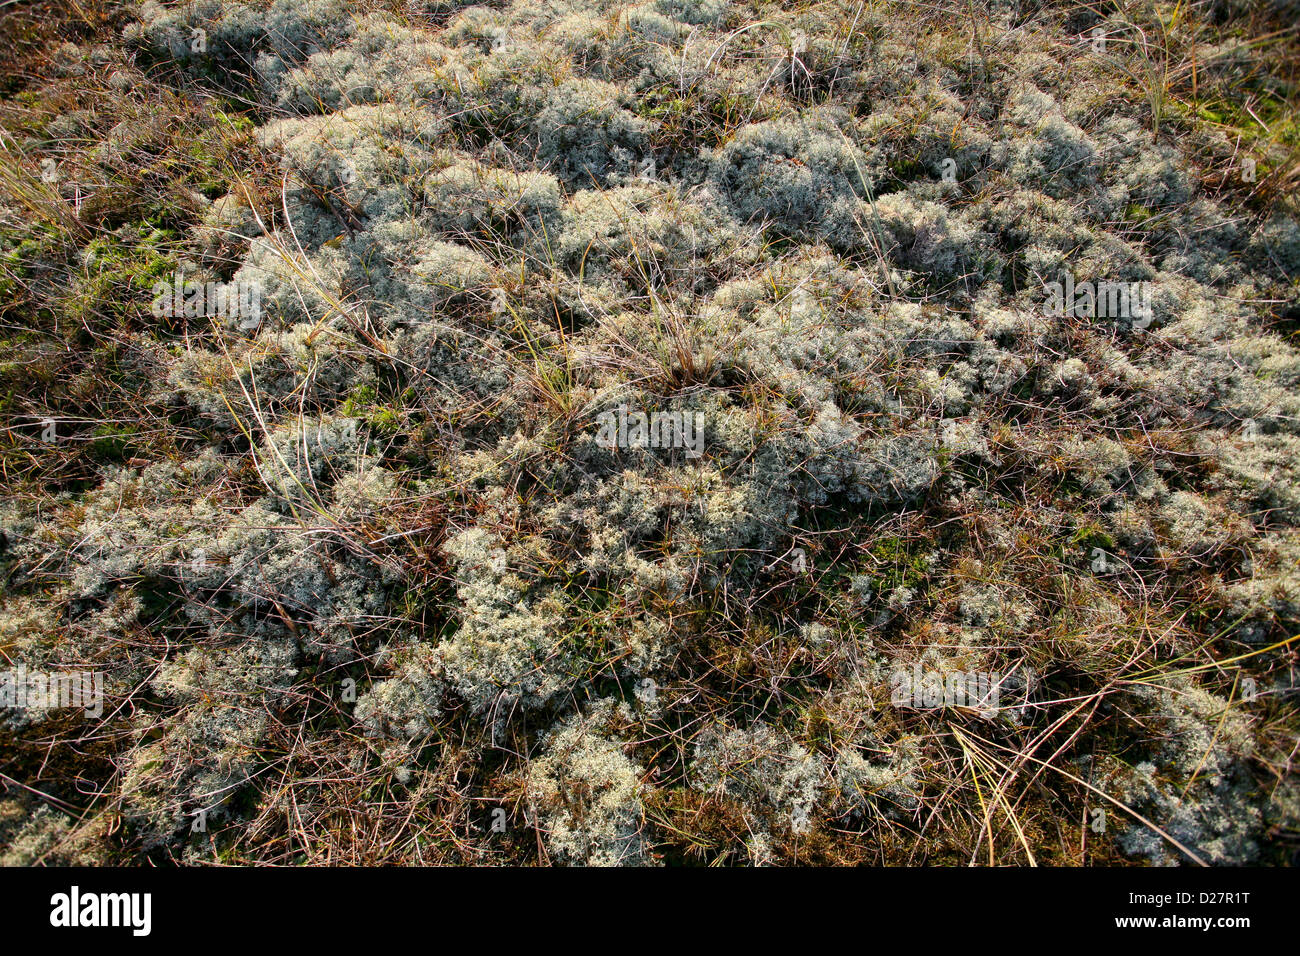 Reindeer lichen with sedges, grasses and moss (Cladonia portentosa) Stock Photo